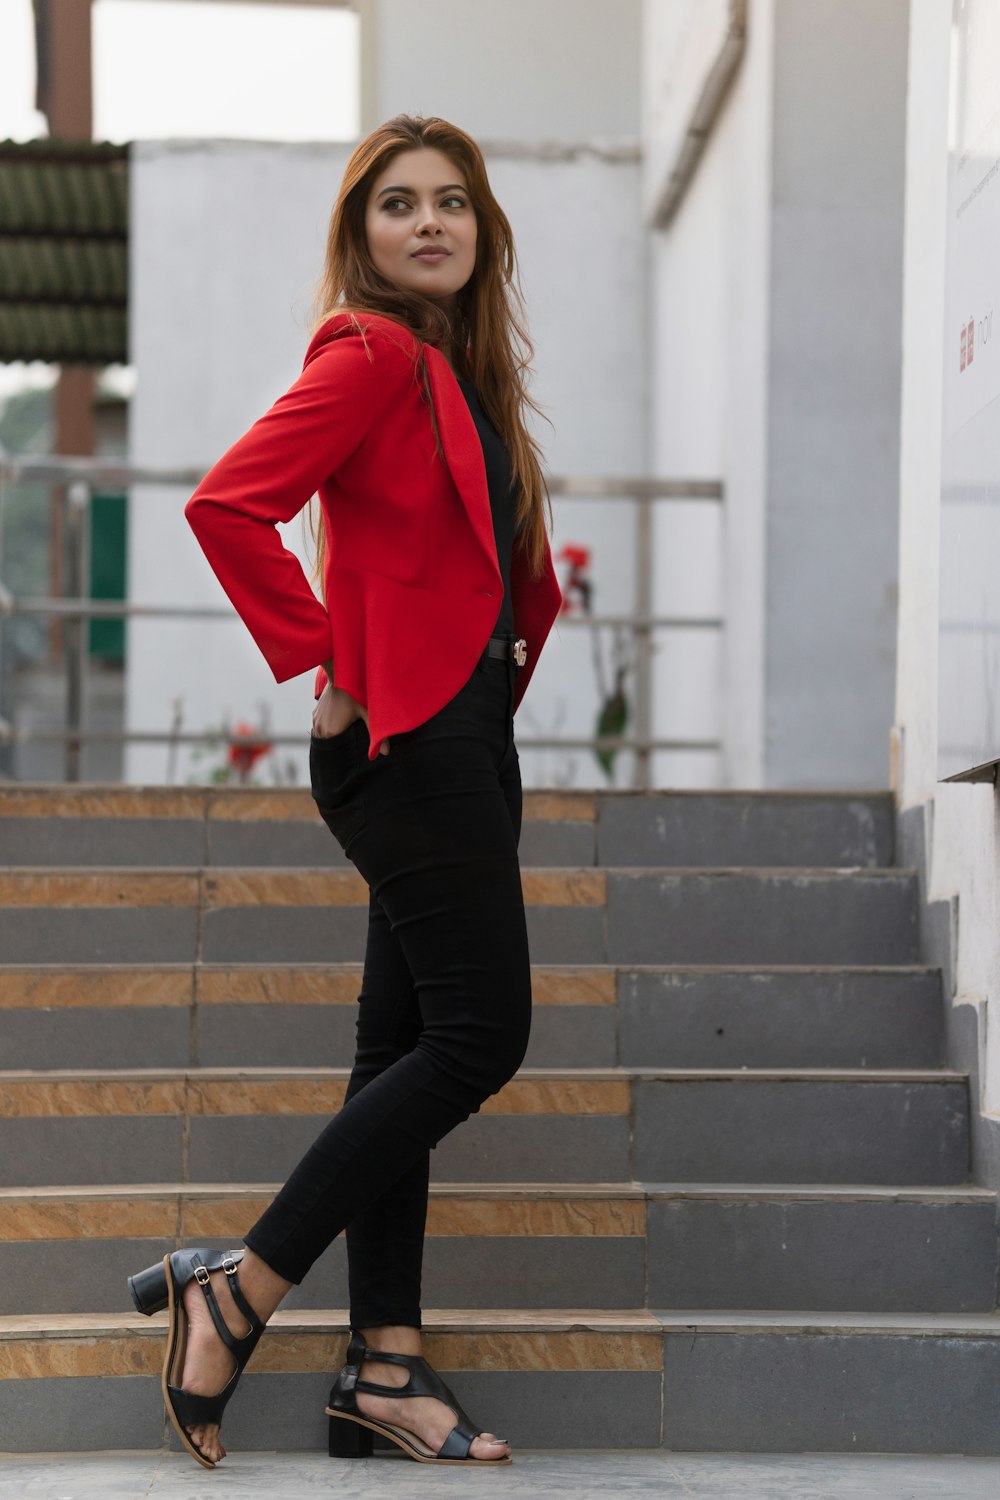 udskille indre Alle slags Woman in red blazer and black pants standing on gray concrete stairs photo  – Free Clothing Image on Unsplash